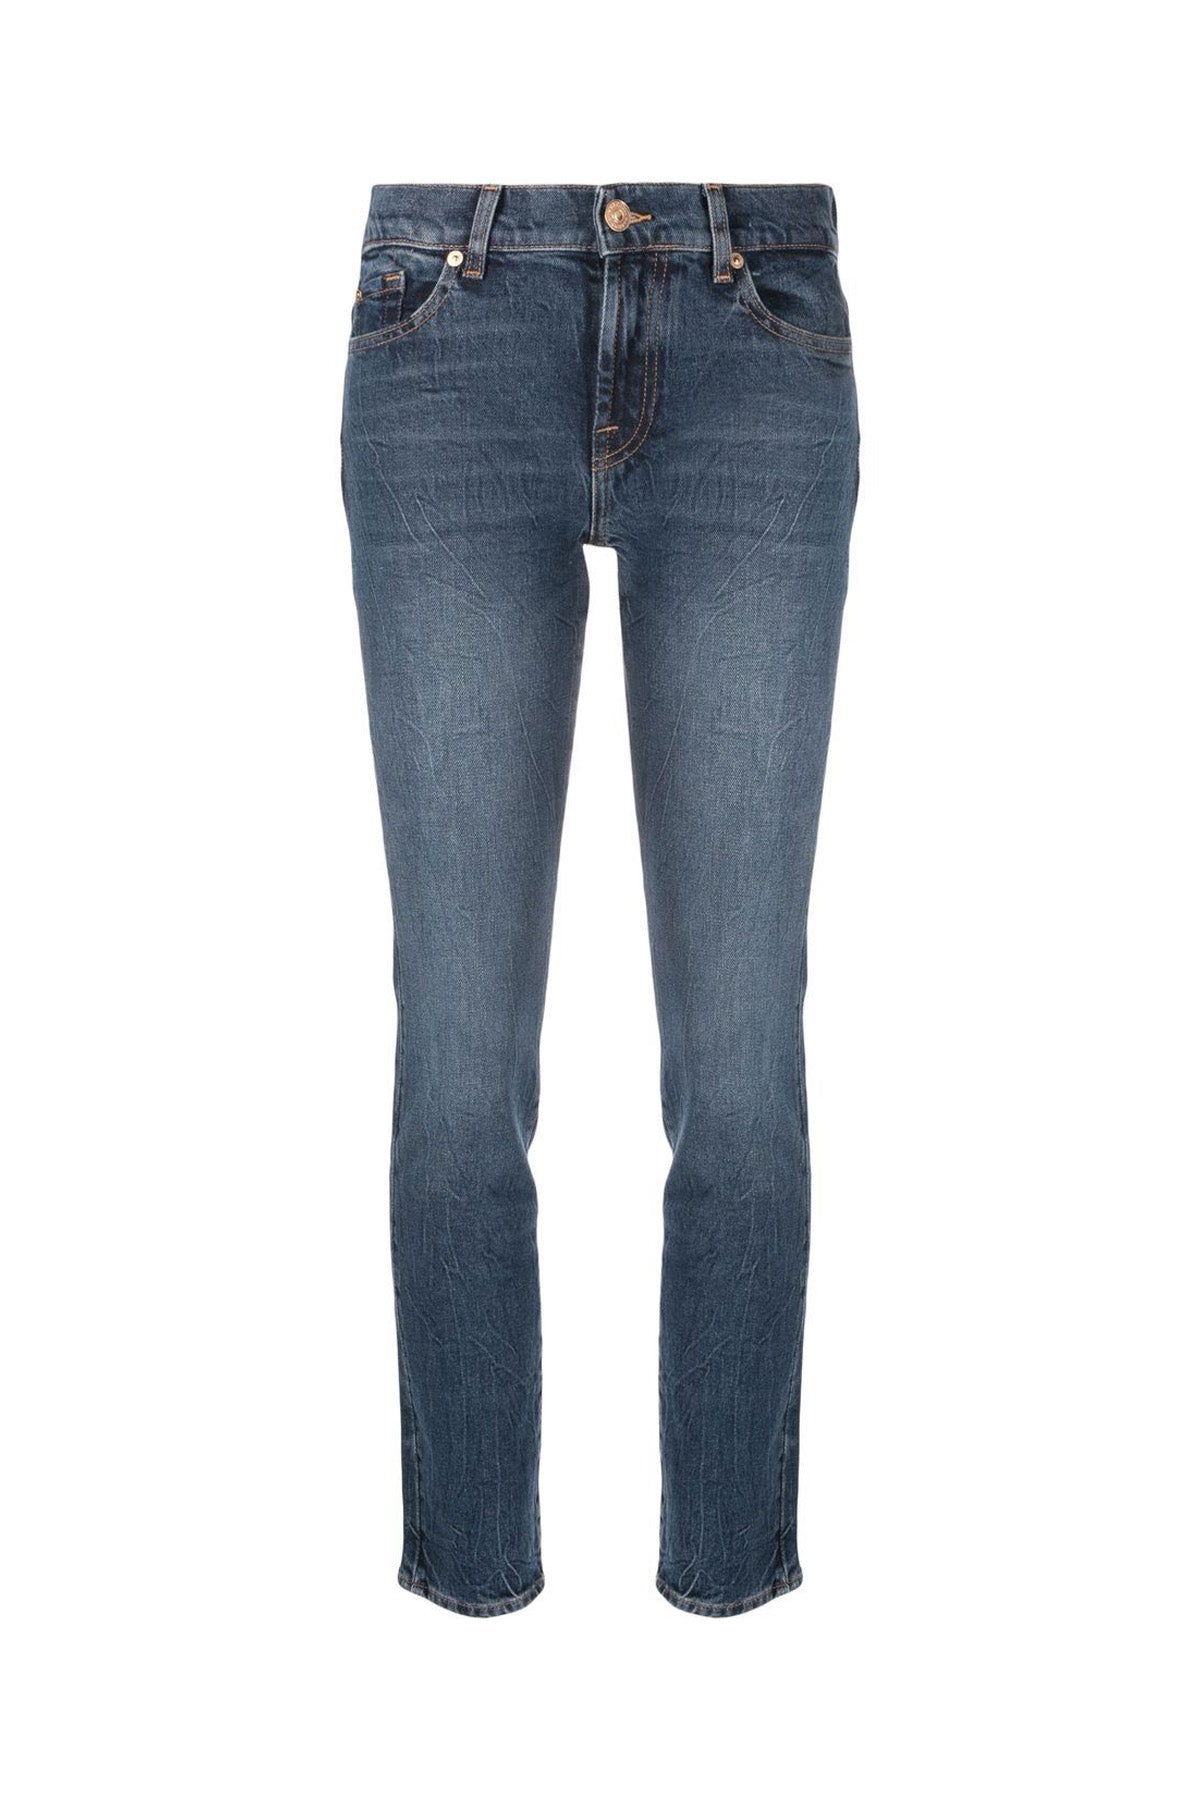 7 For All Mankind Roxanne Slim Fit Jeans-Libas Trendy Fashion Store